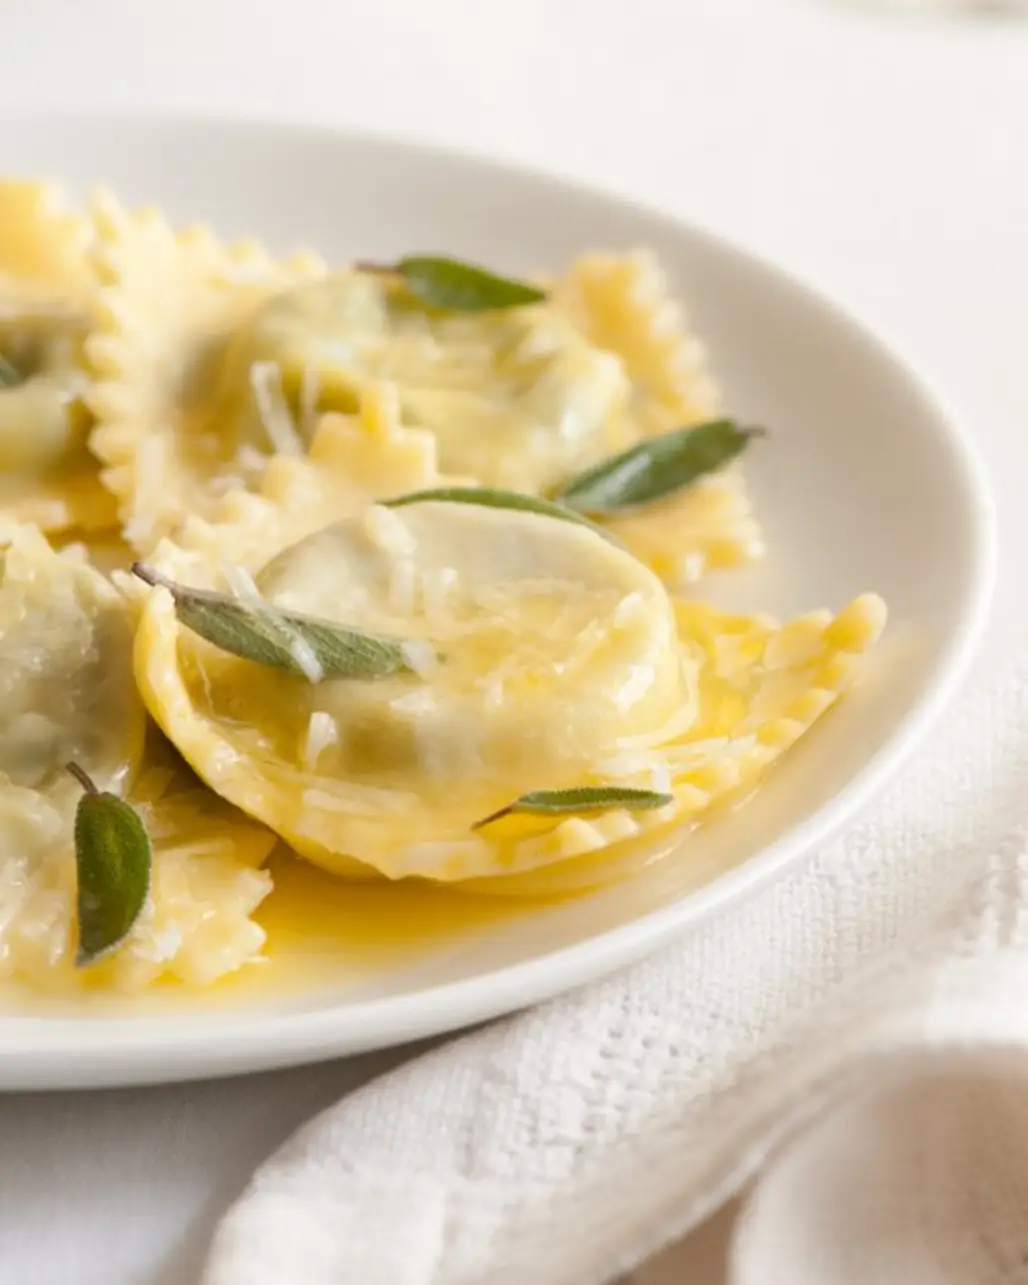 Spinach Ravioli with Zucchini Noodles